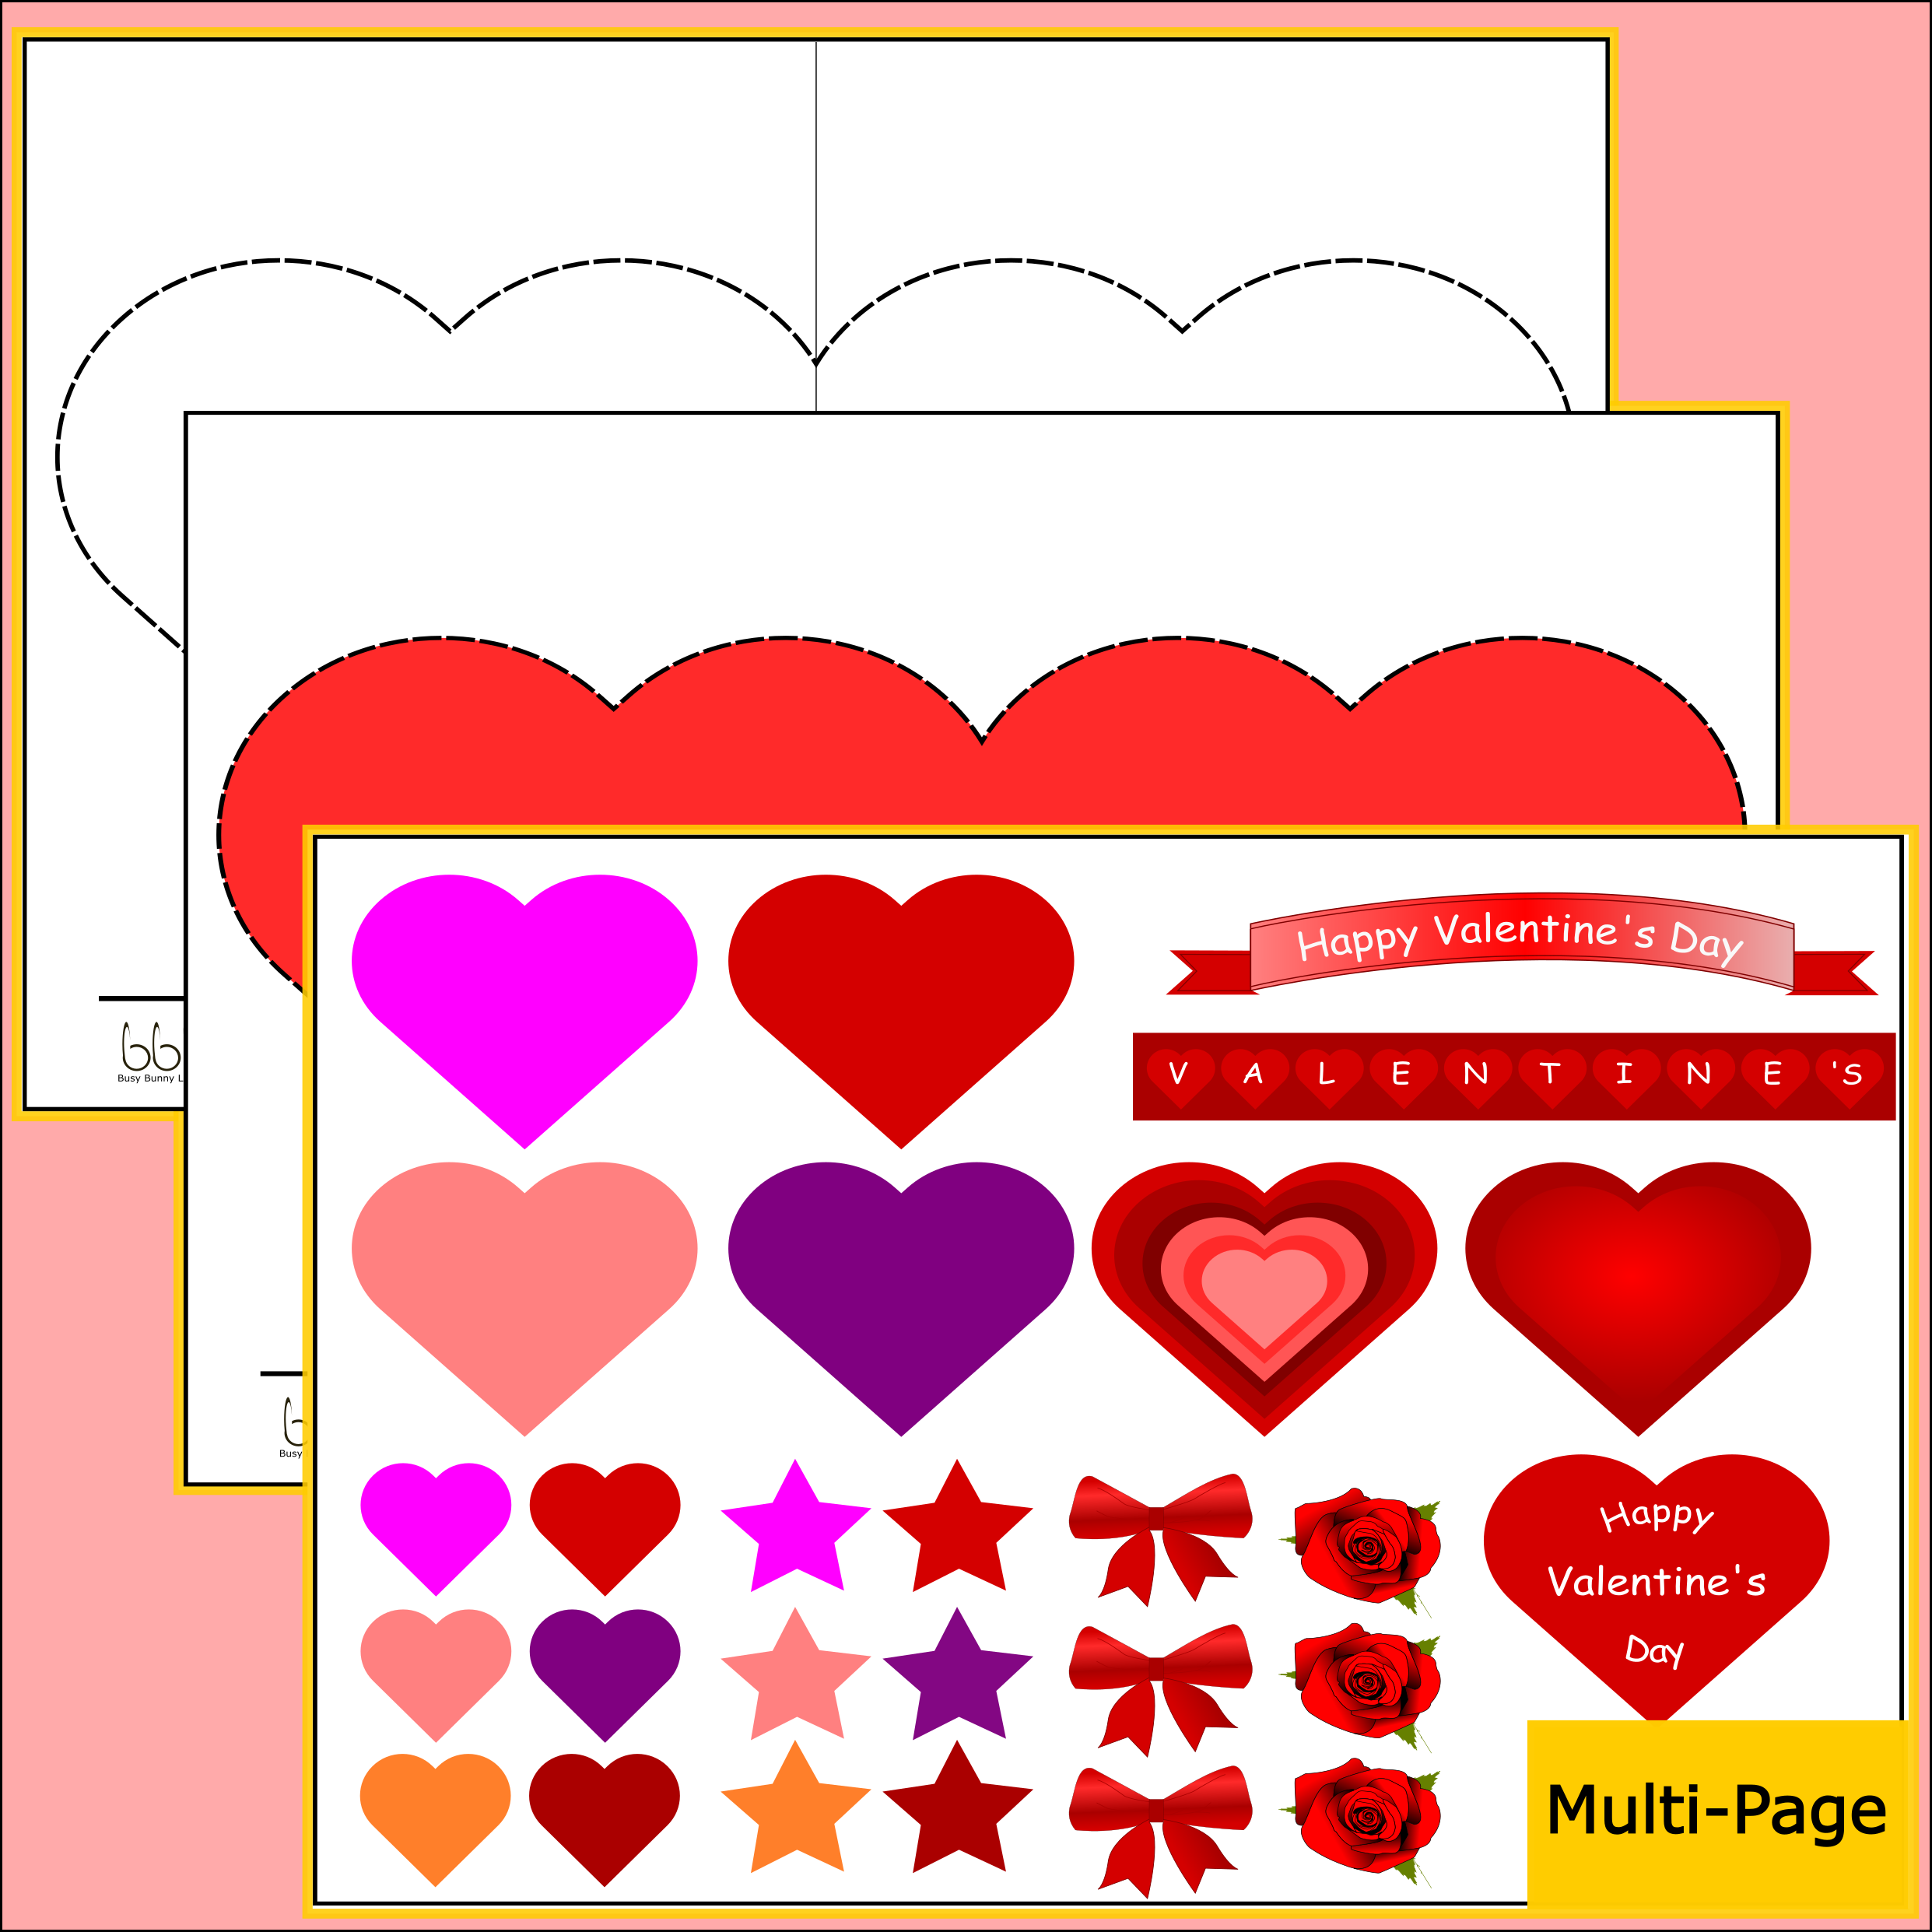 Valentines day cards - make your own